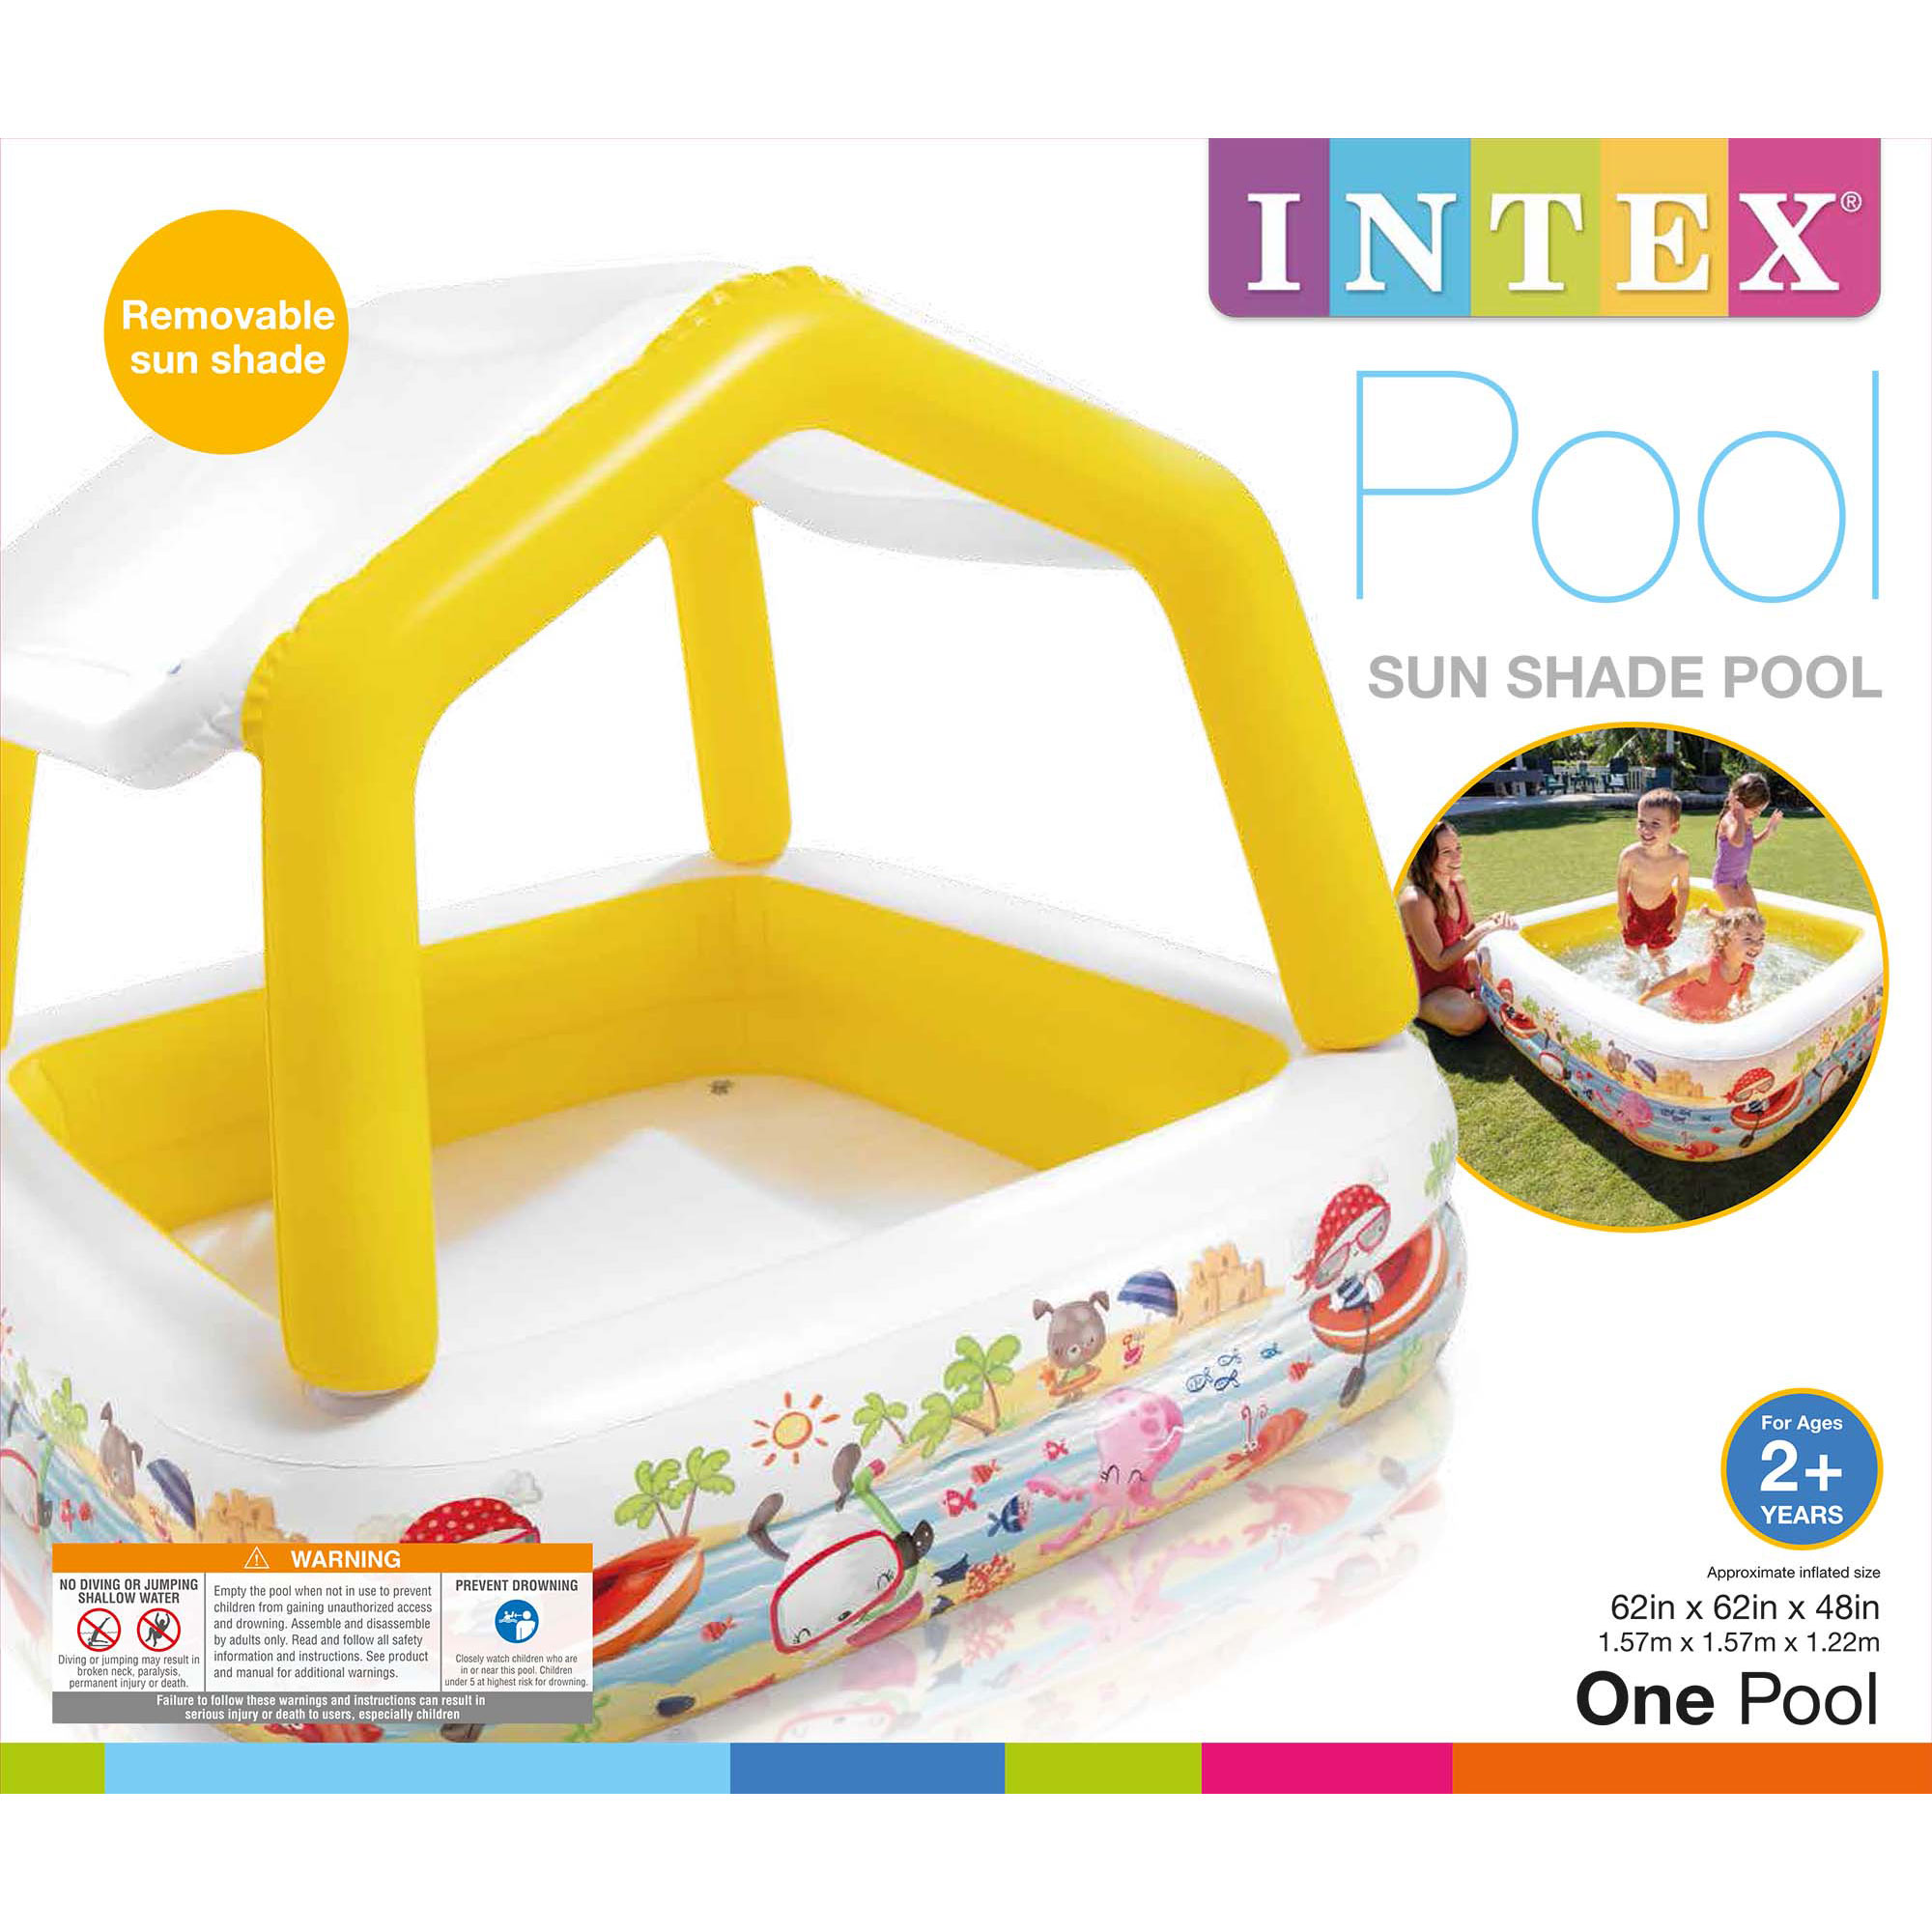 Intex 5ft x 48in Inflatable Ocean Scene Sun Shade Kids Pool With Canopy - image 12 of 12